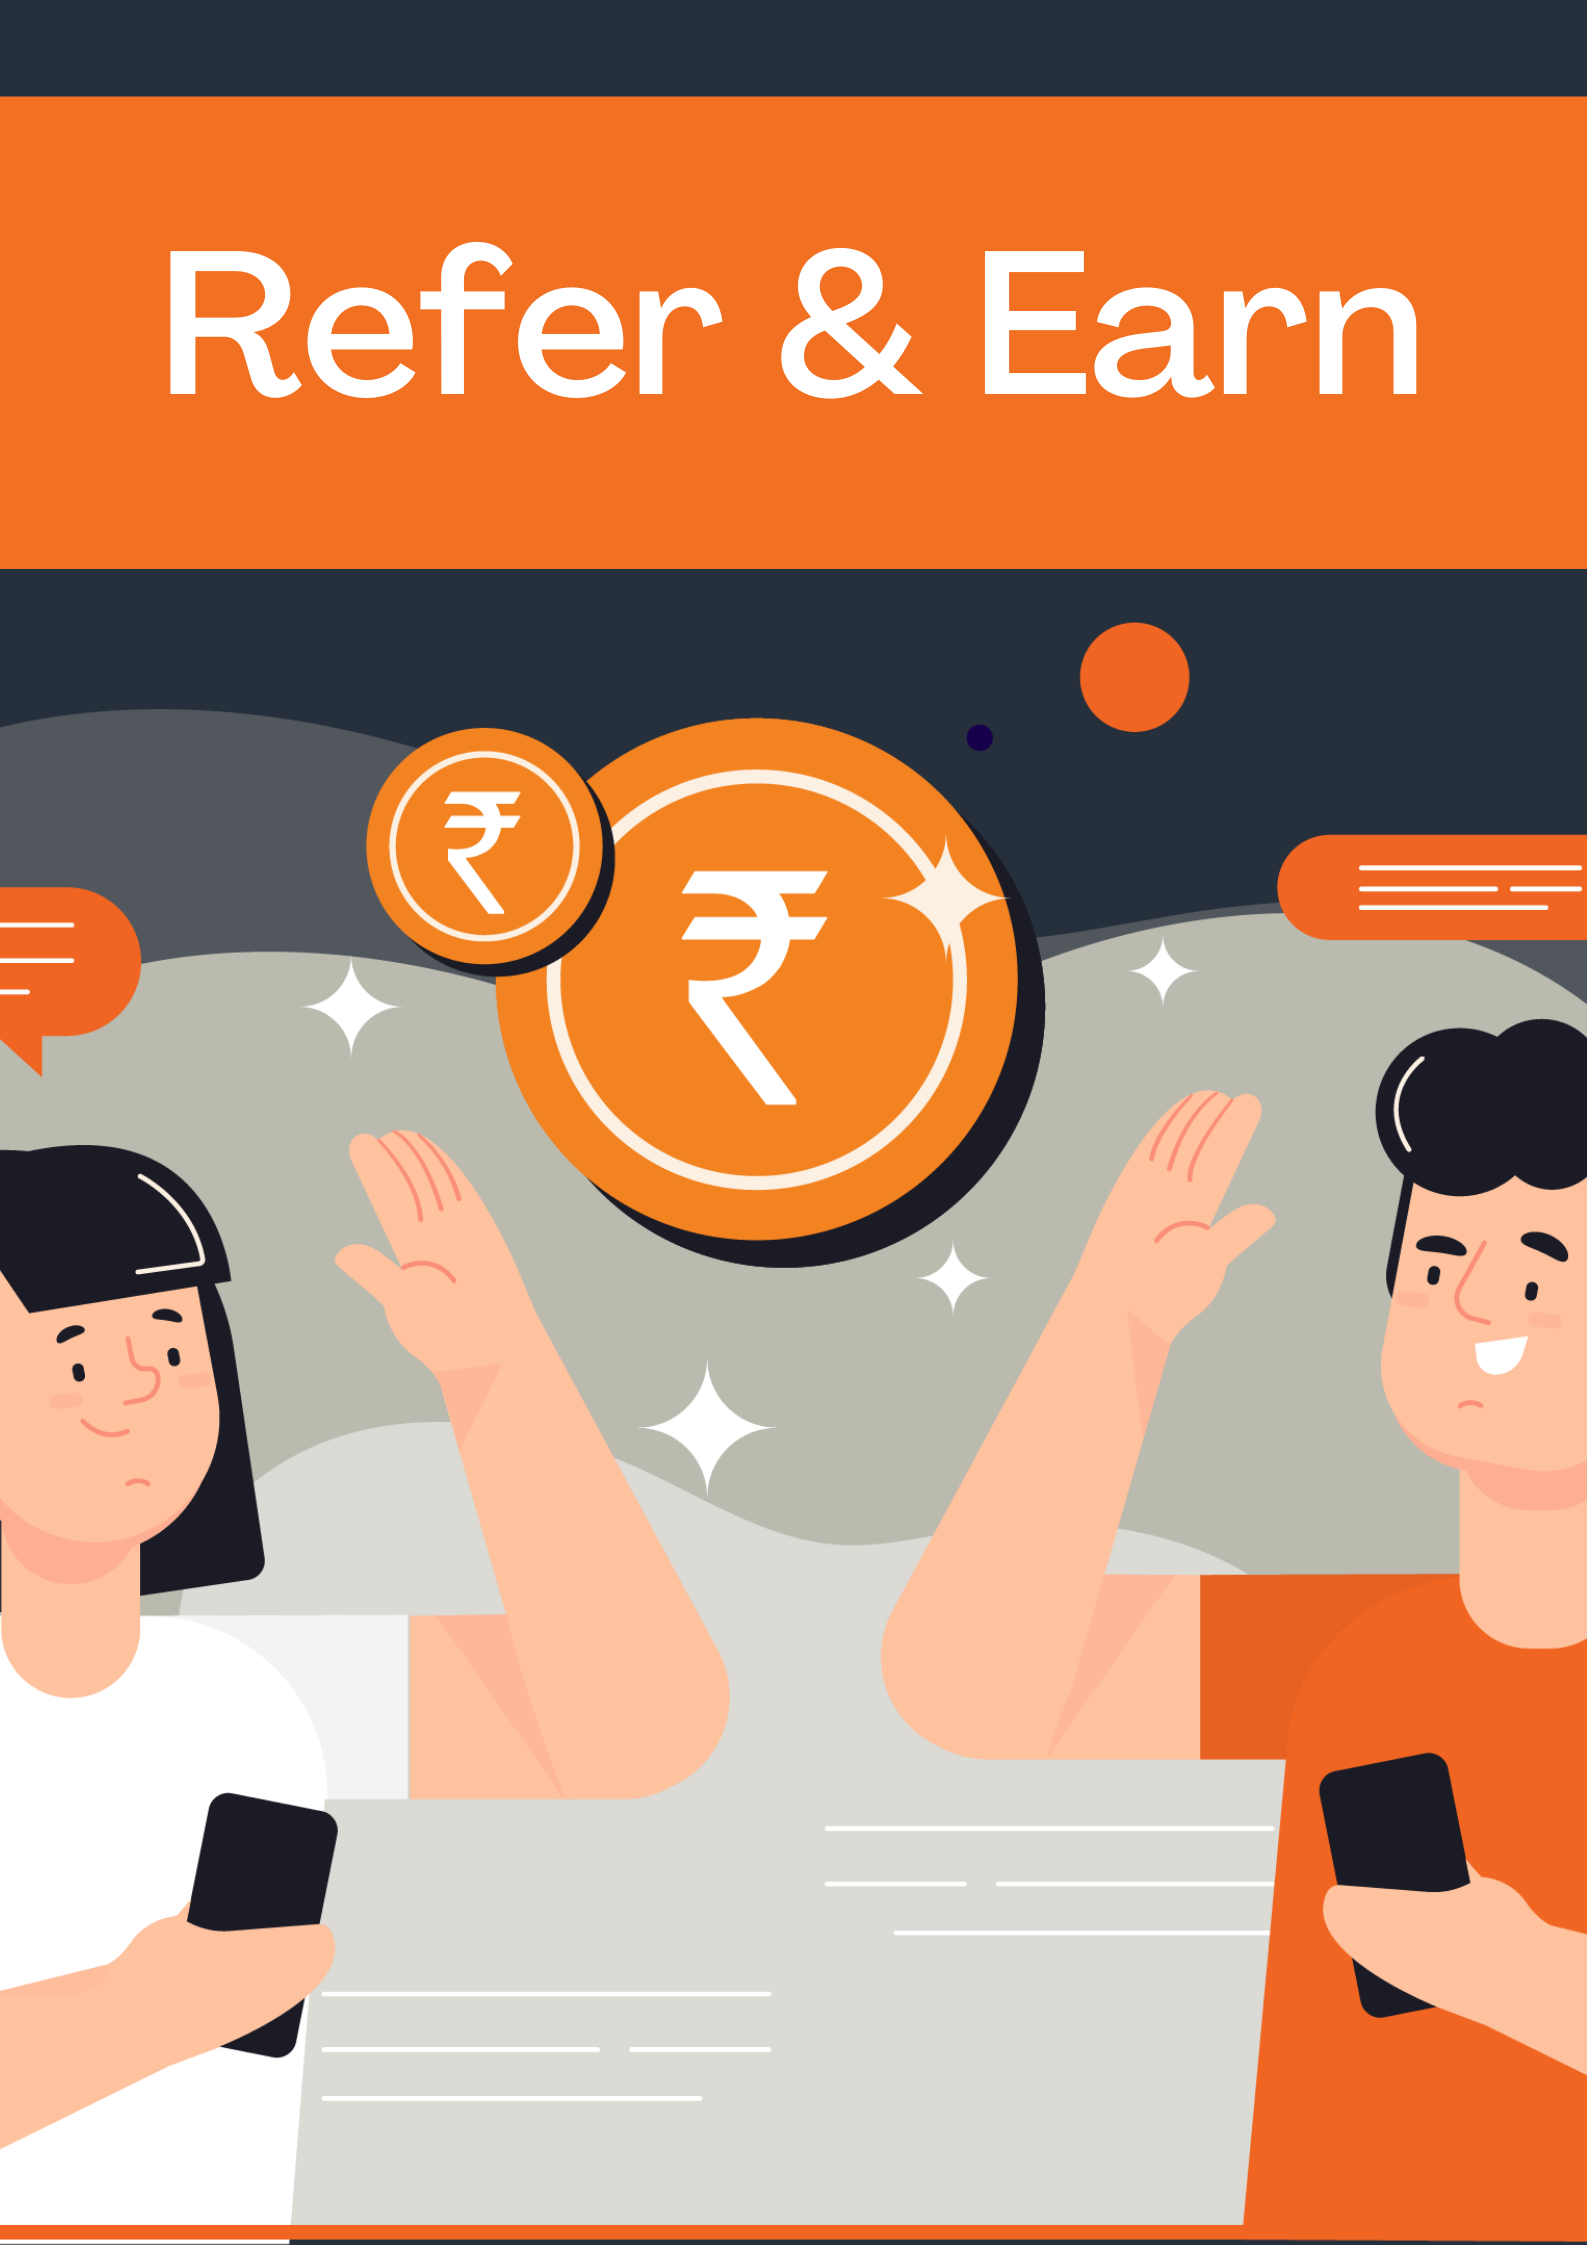 Refer and Earn Image